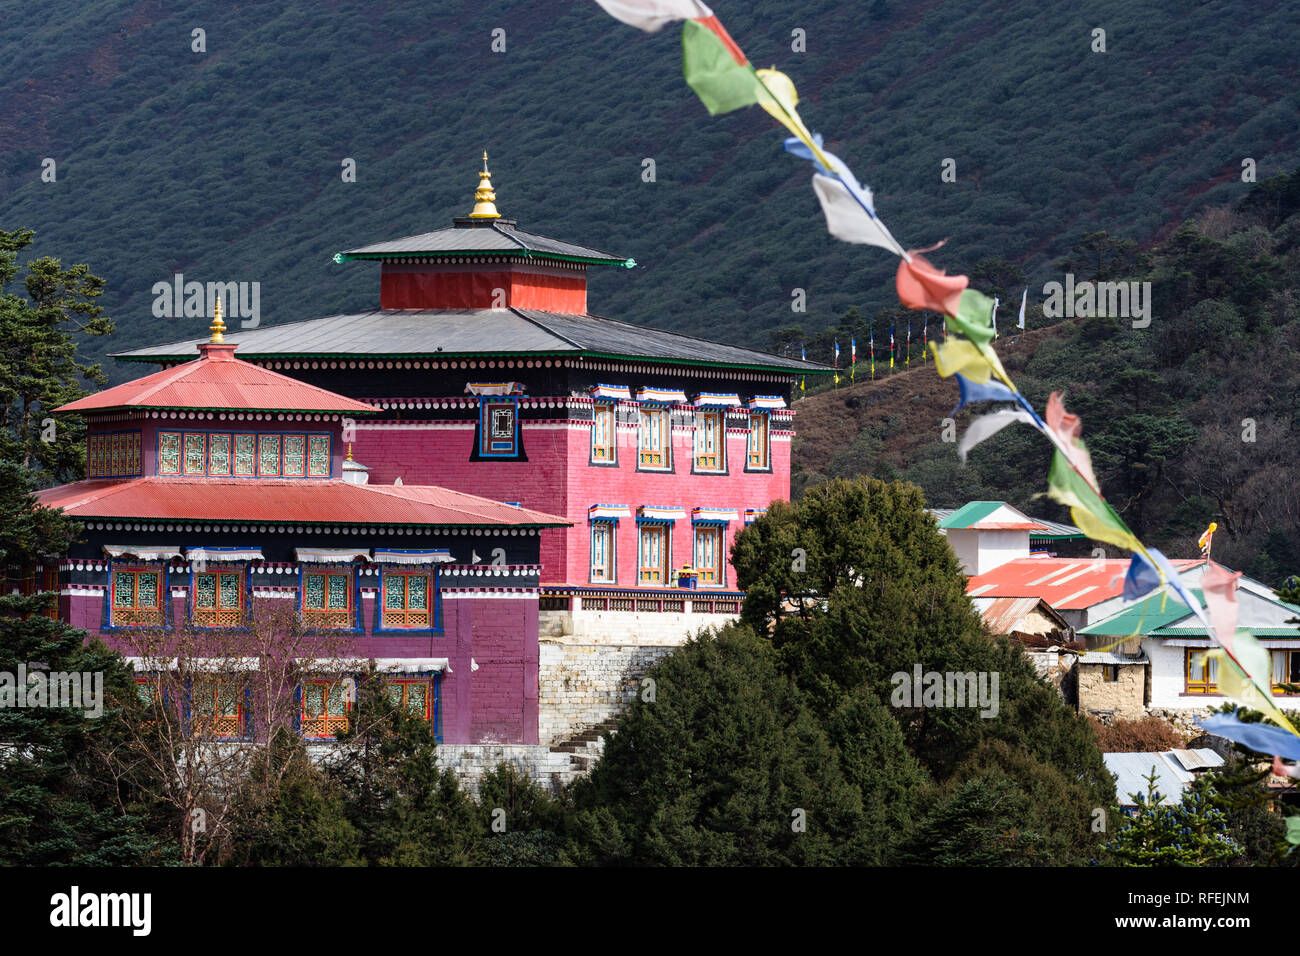 Tengboche monastery with the forest in the background, Sagarmatha, Nepal Stock Photo